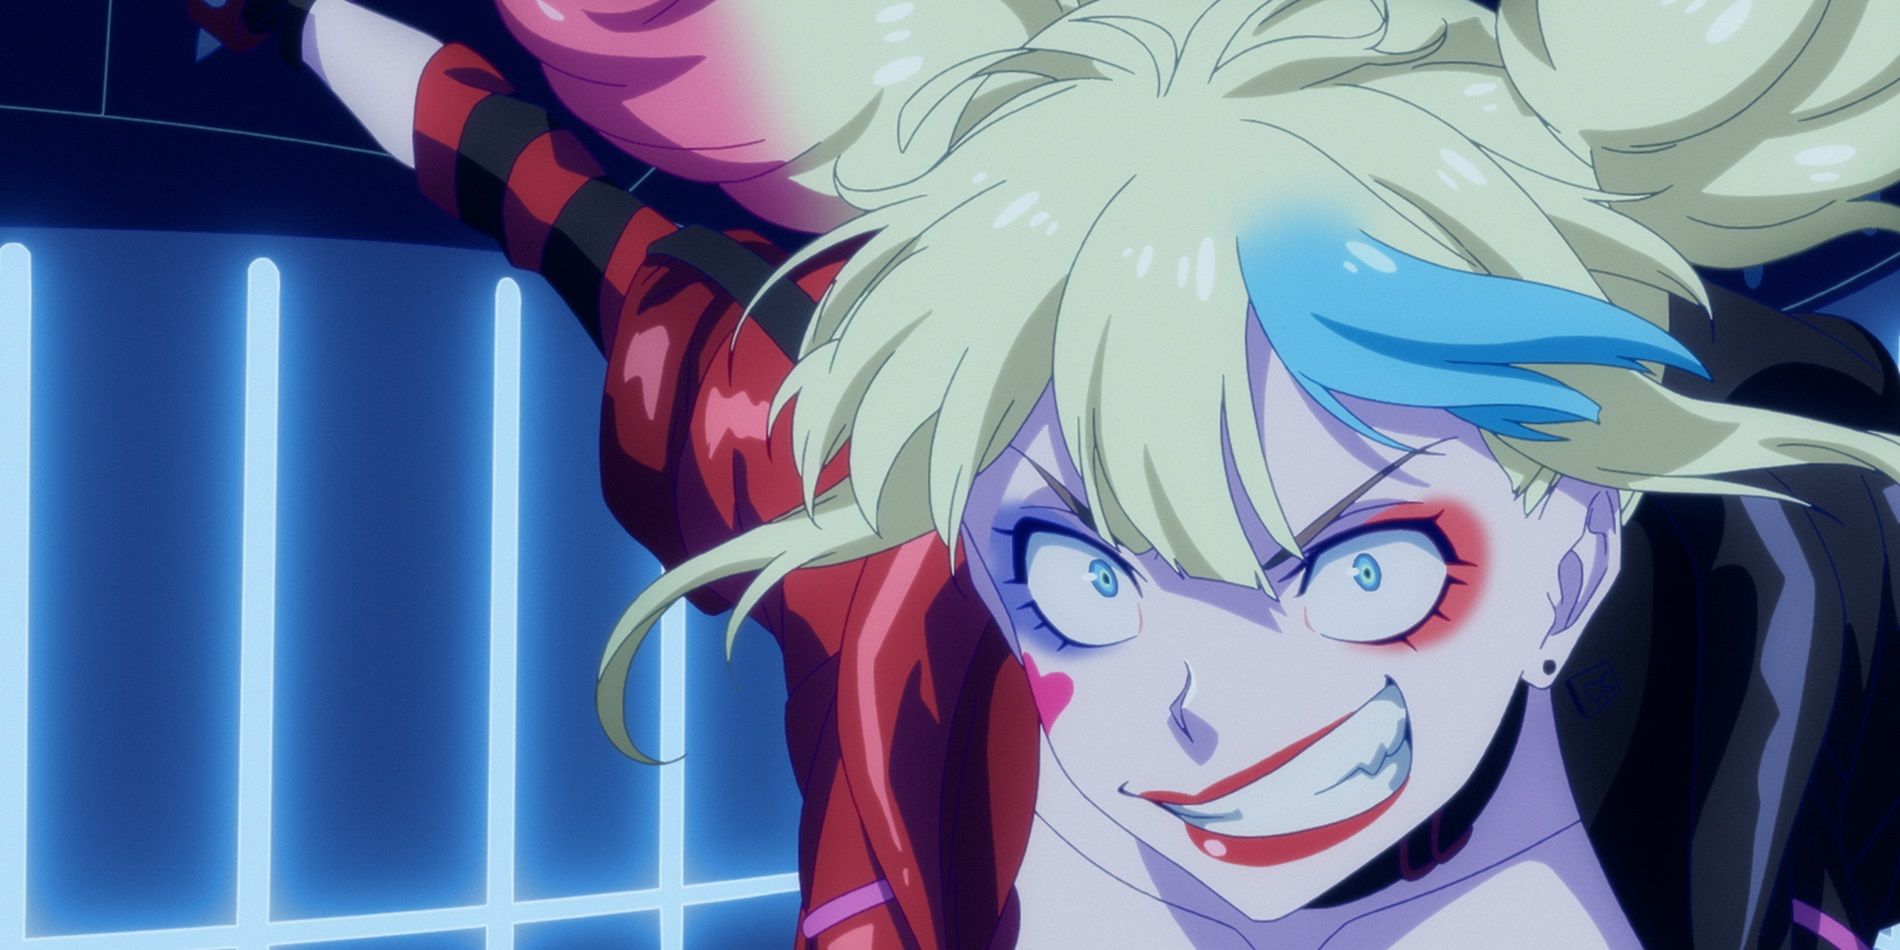 Suicide Squad Isekai featuring Harley Quinn grinning and about to attack